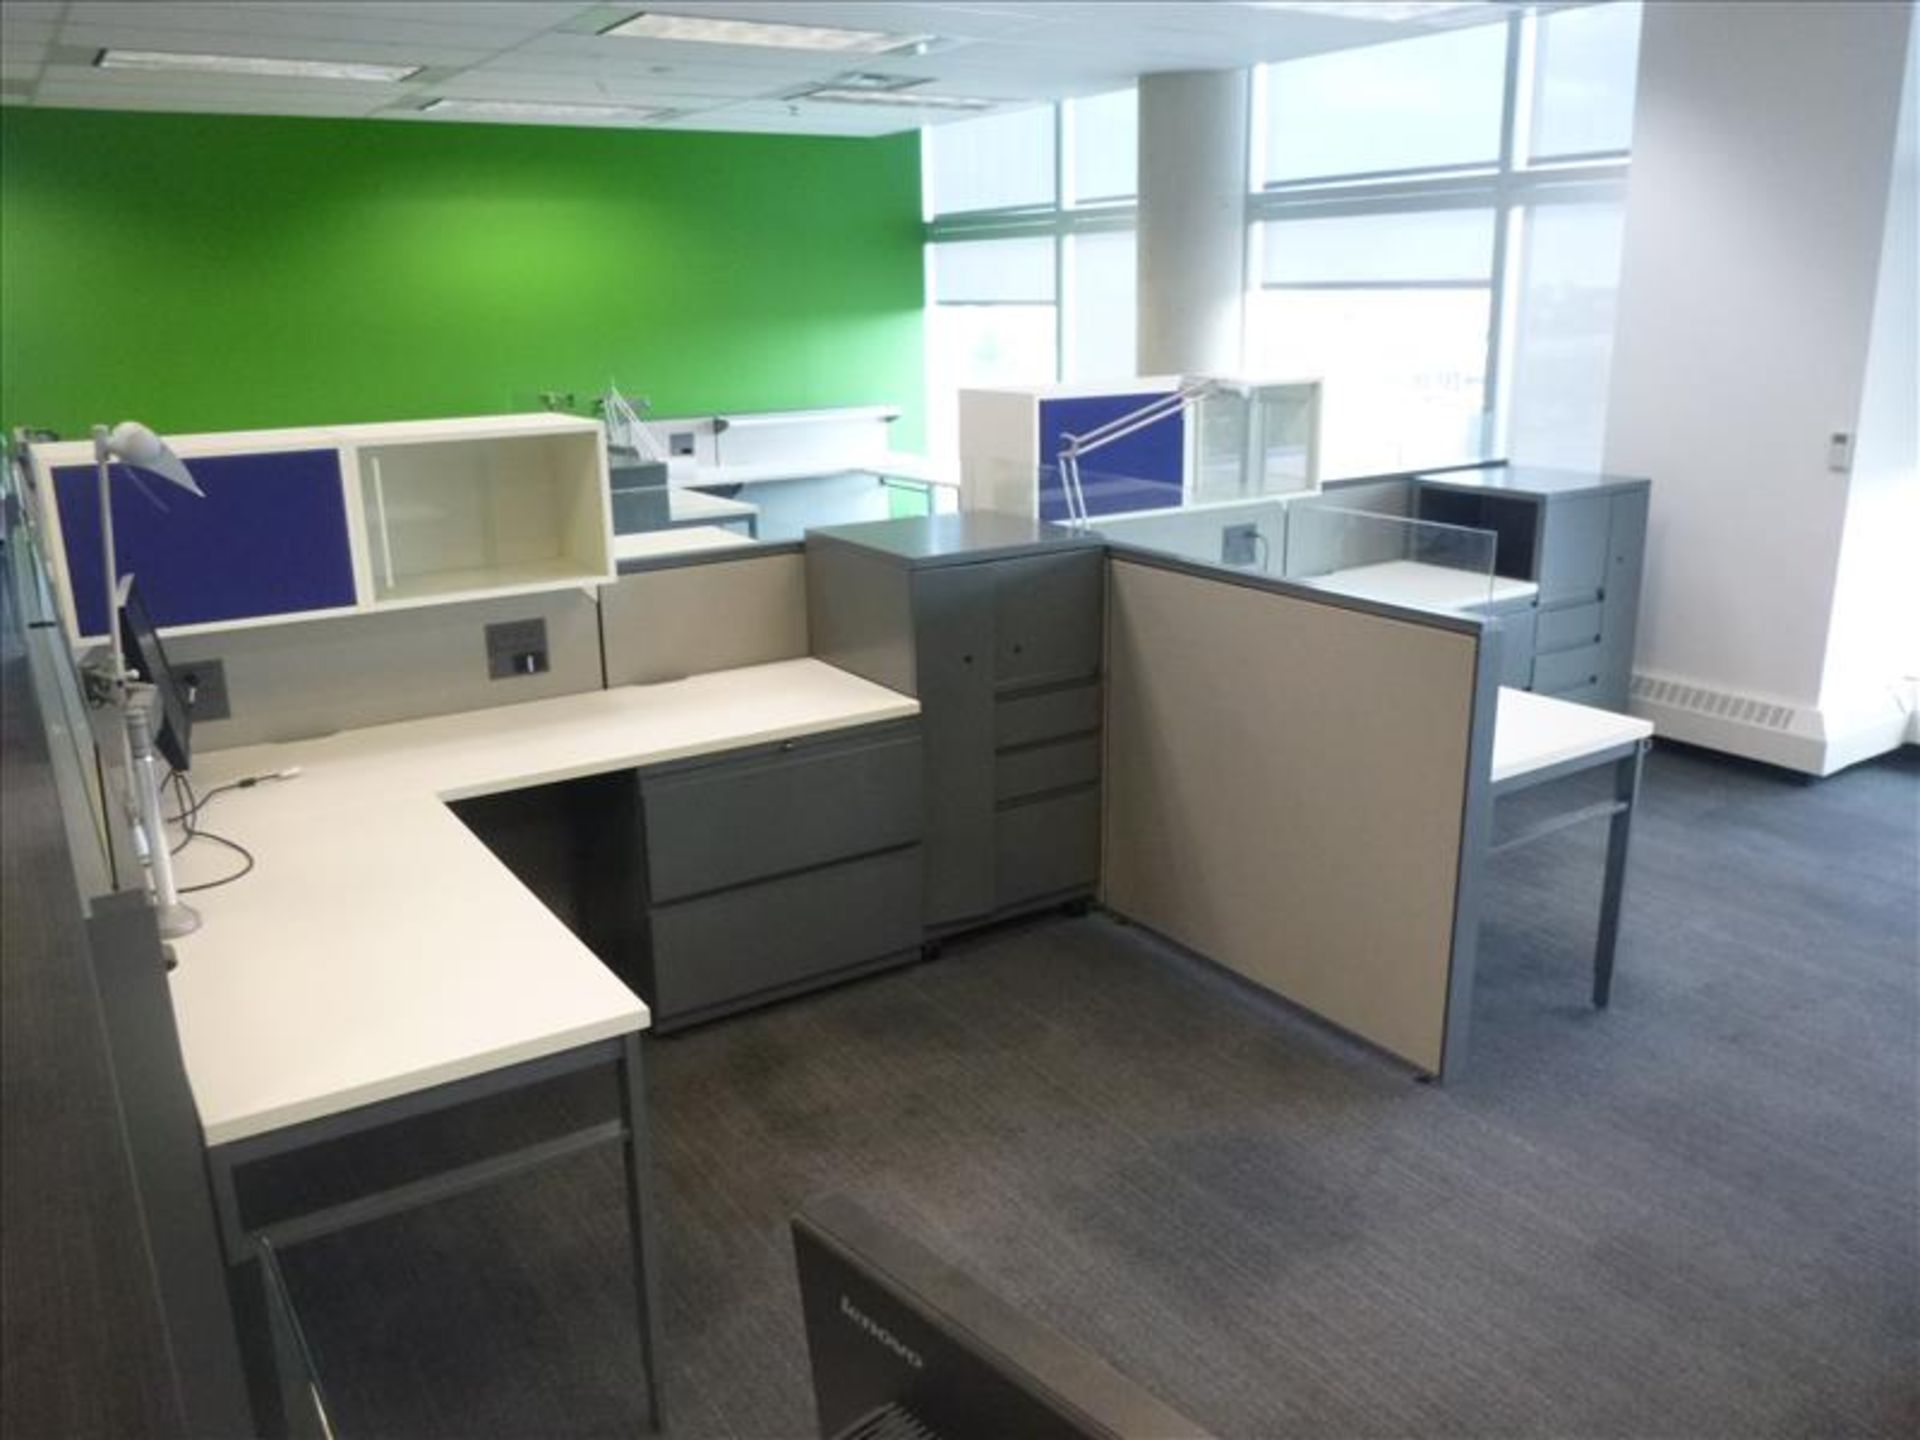 (2) Haworth cubicle workstations, approx. 12' x 16.5' footprint (excl. contents and office